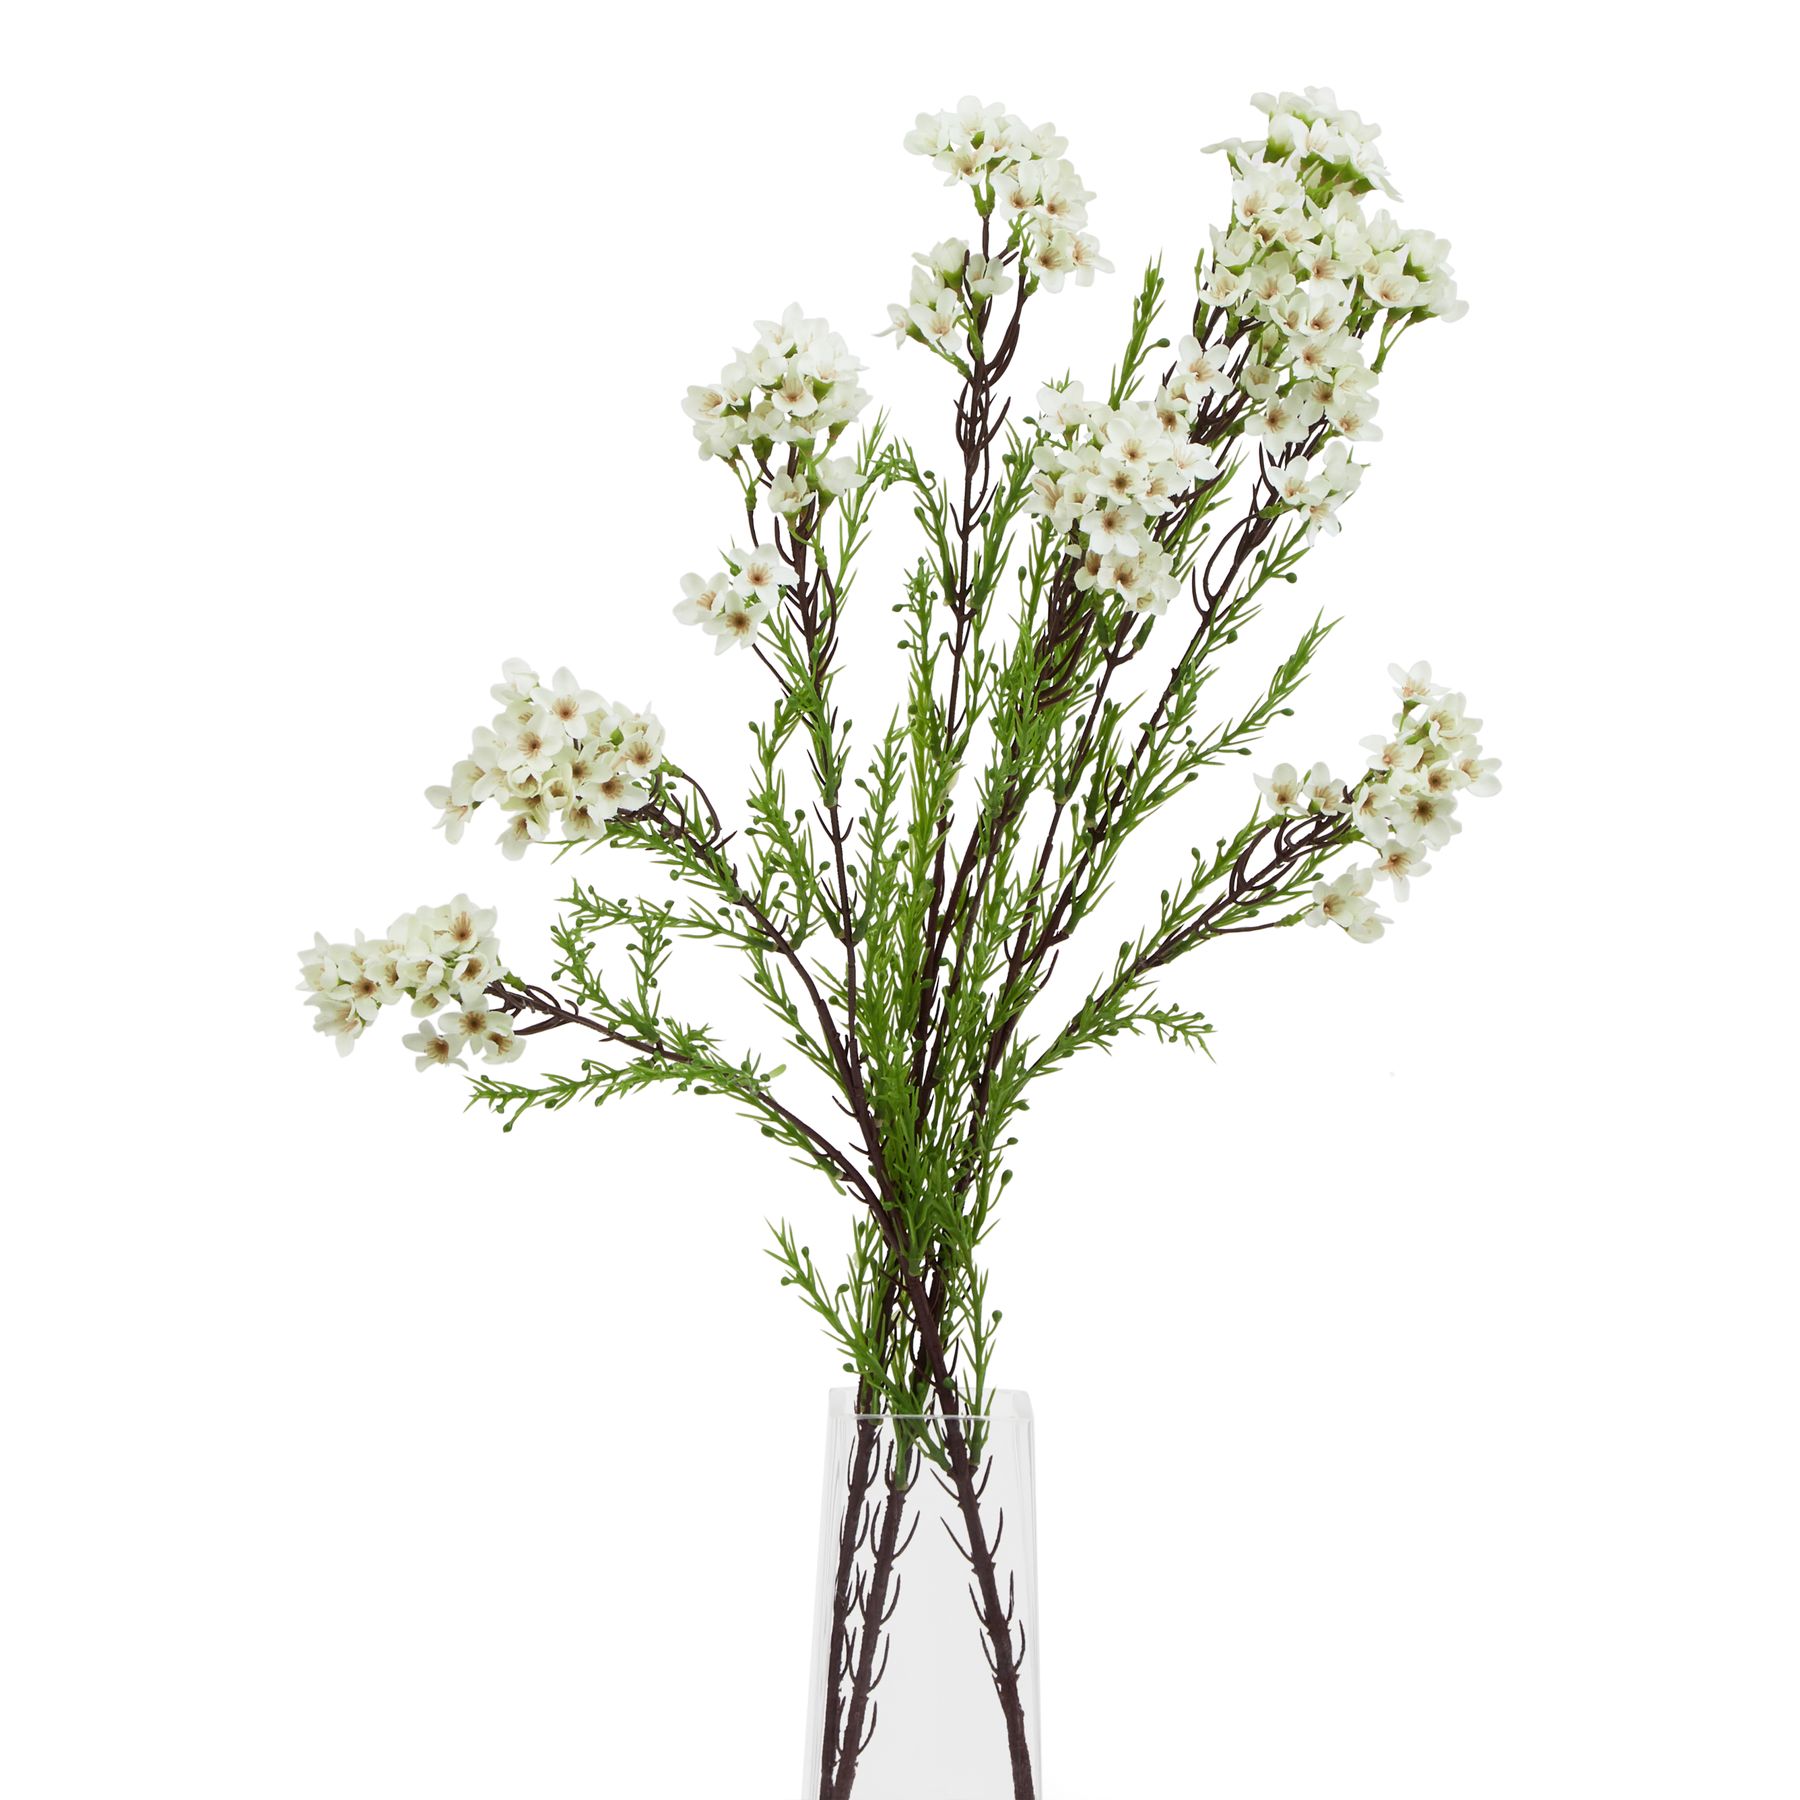 The Natural Garden Collection White Waxflower - Image 3